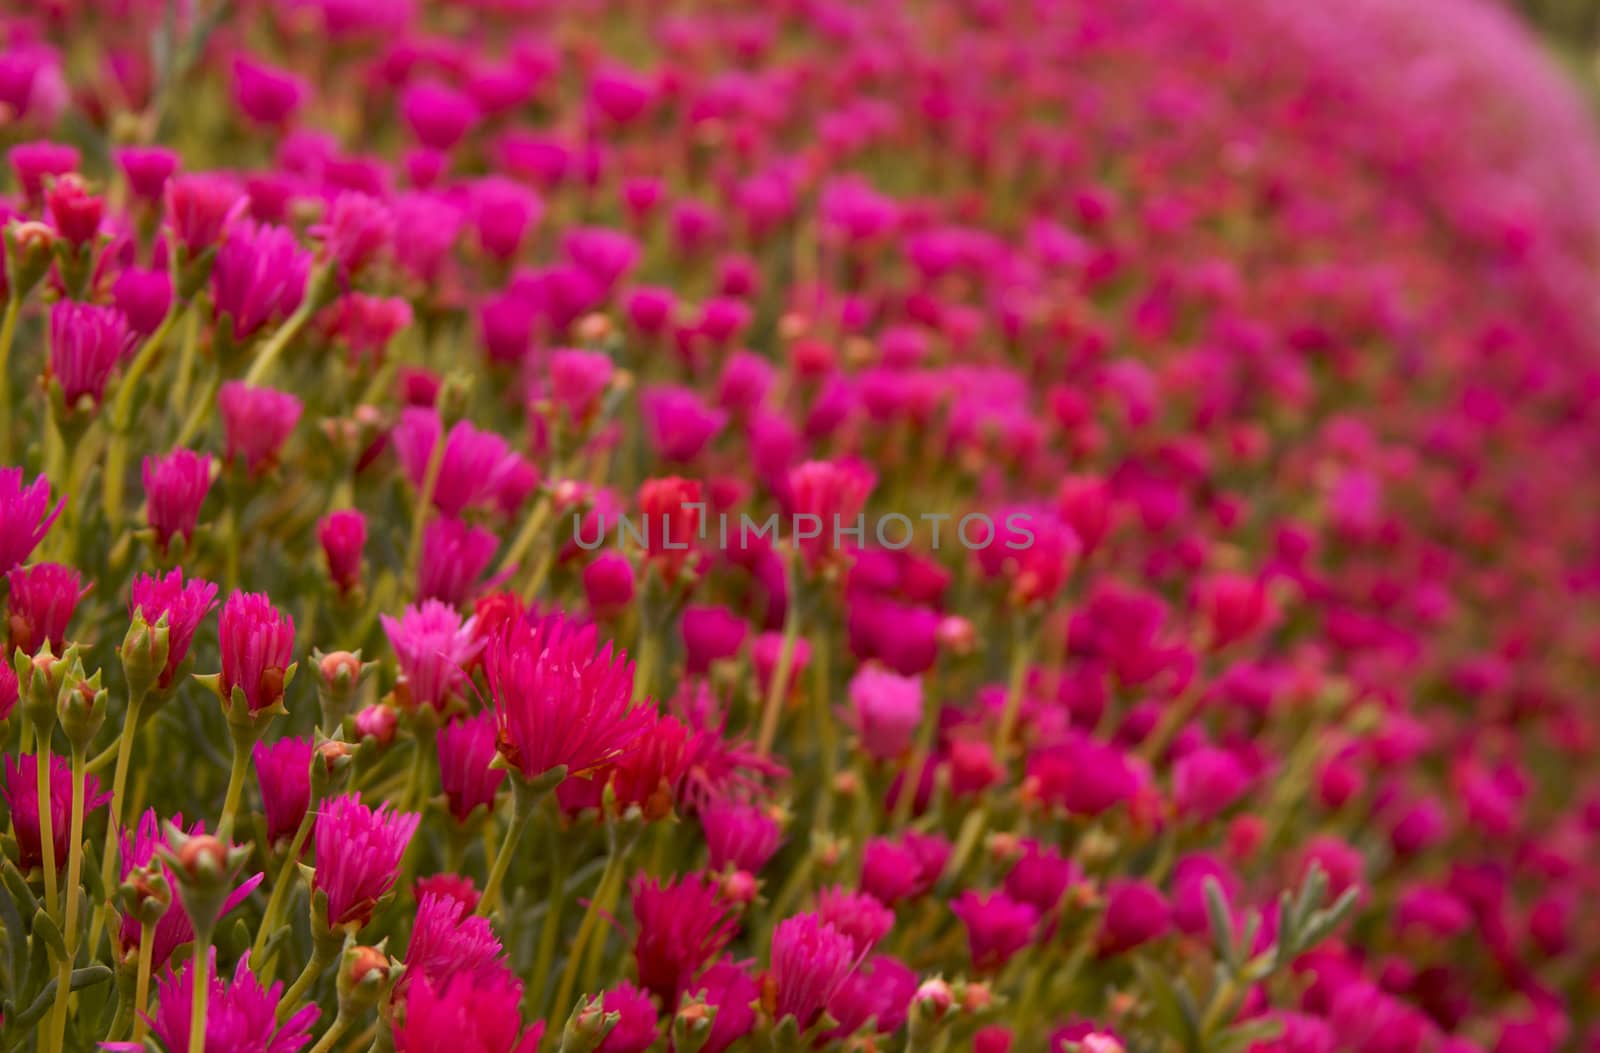 Bed of crowed pink and red flowers with green stems and leaves with narrow depth of field